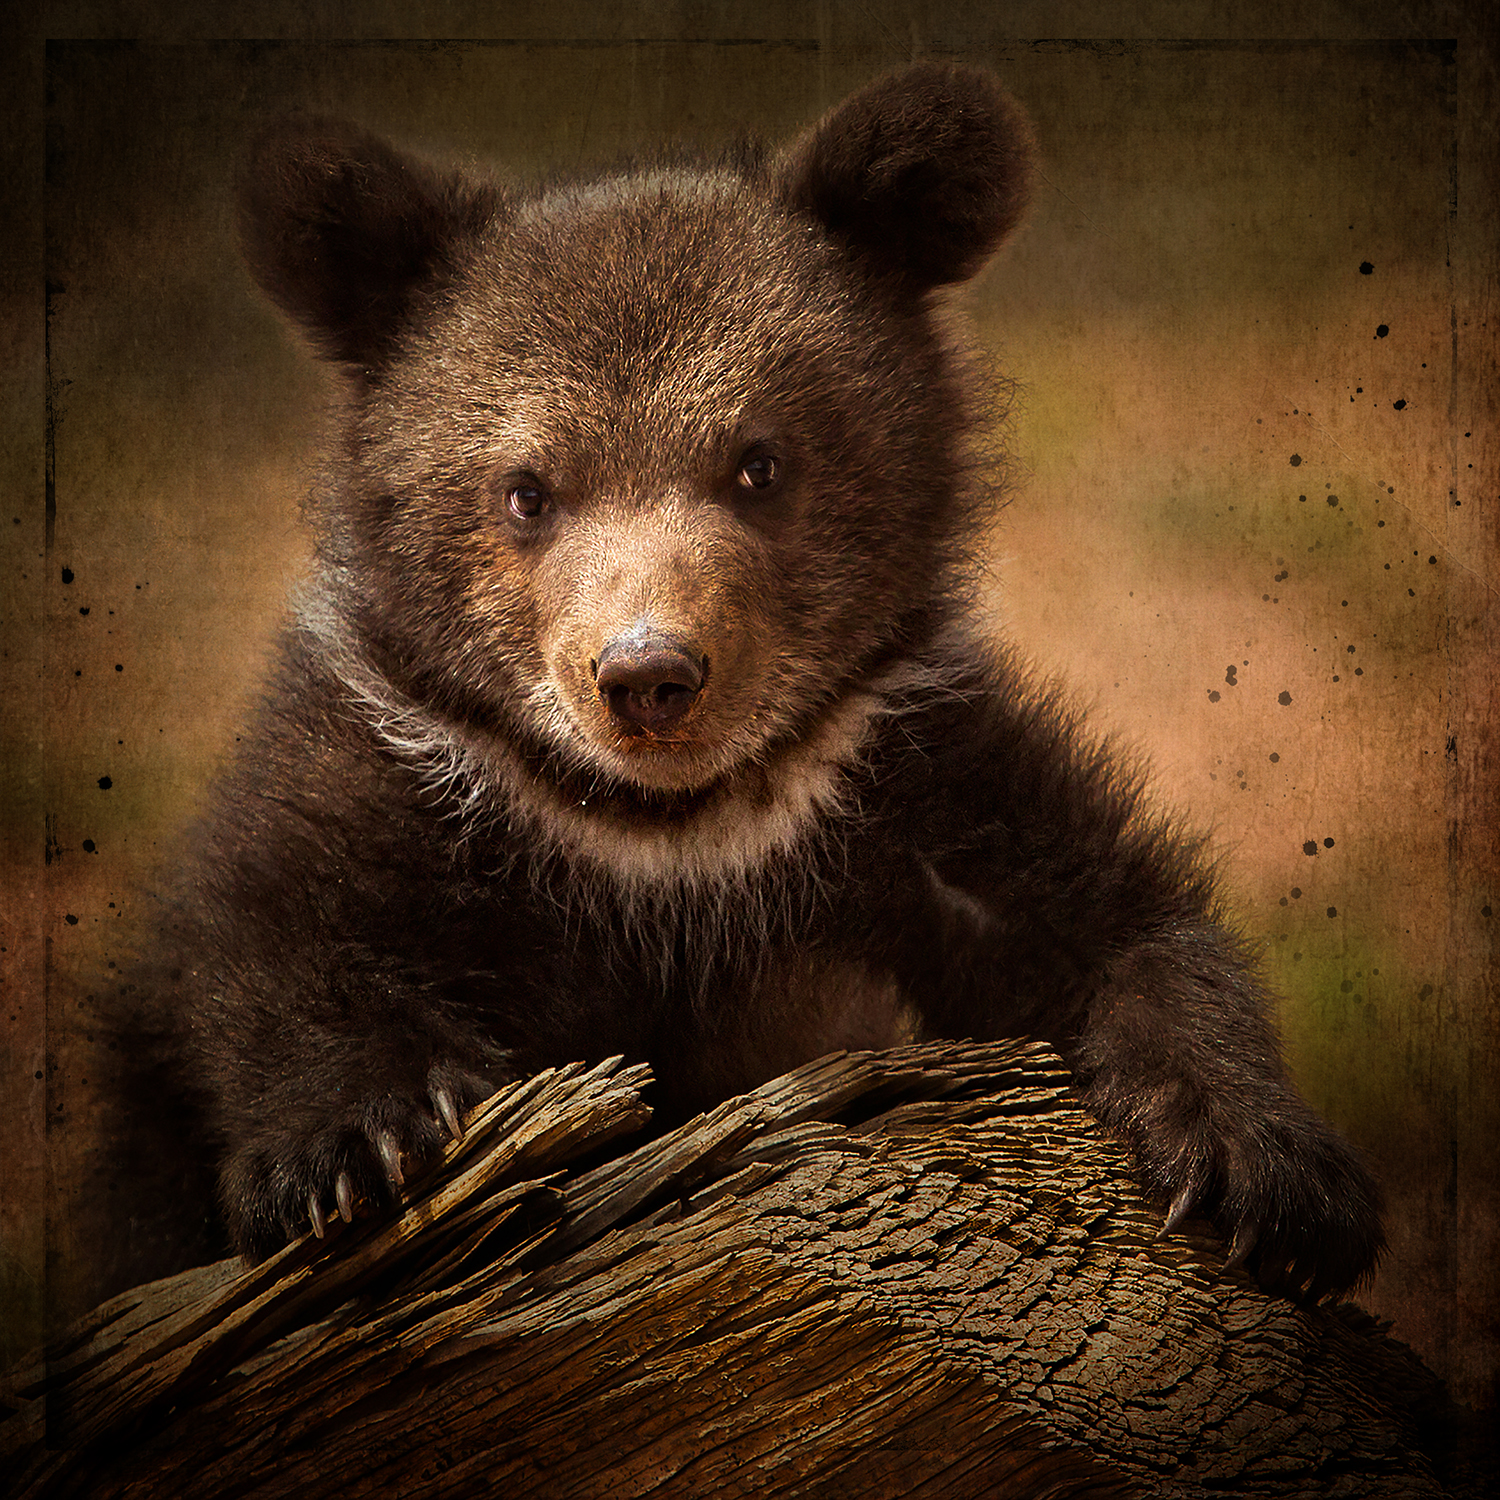 Grizzly cub